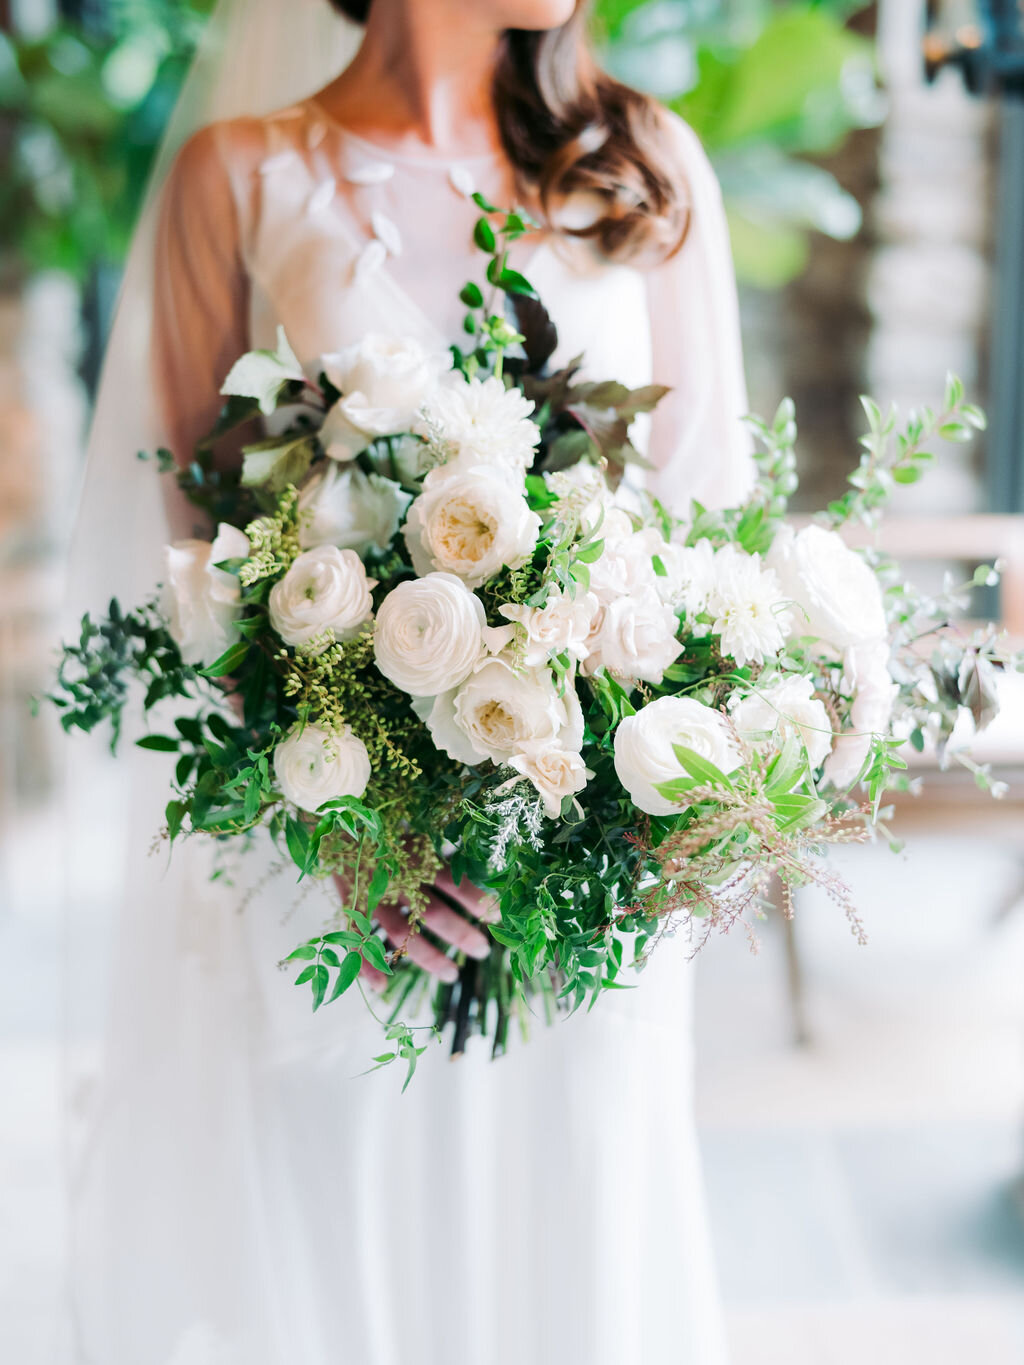 Organic, garden inspired bride’s bouquet with white garden roses, dahlias, and ranunculus with trailing vines and greenery. Nashville wedding floral design.